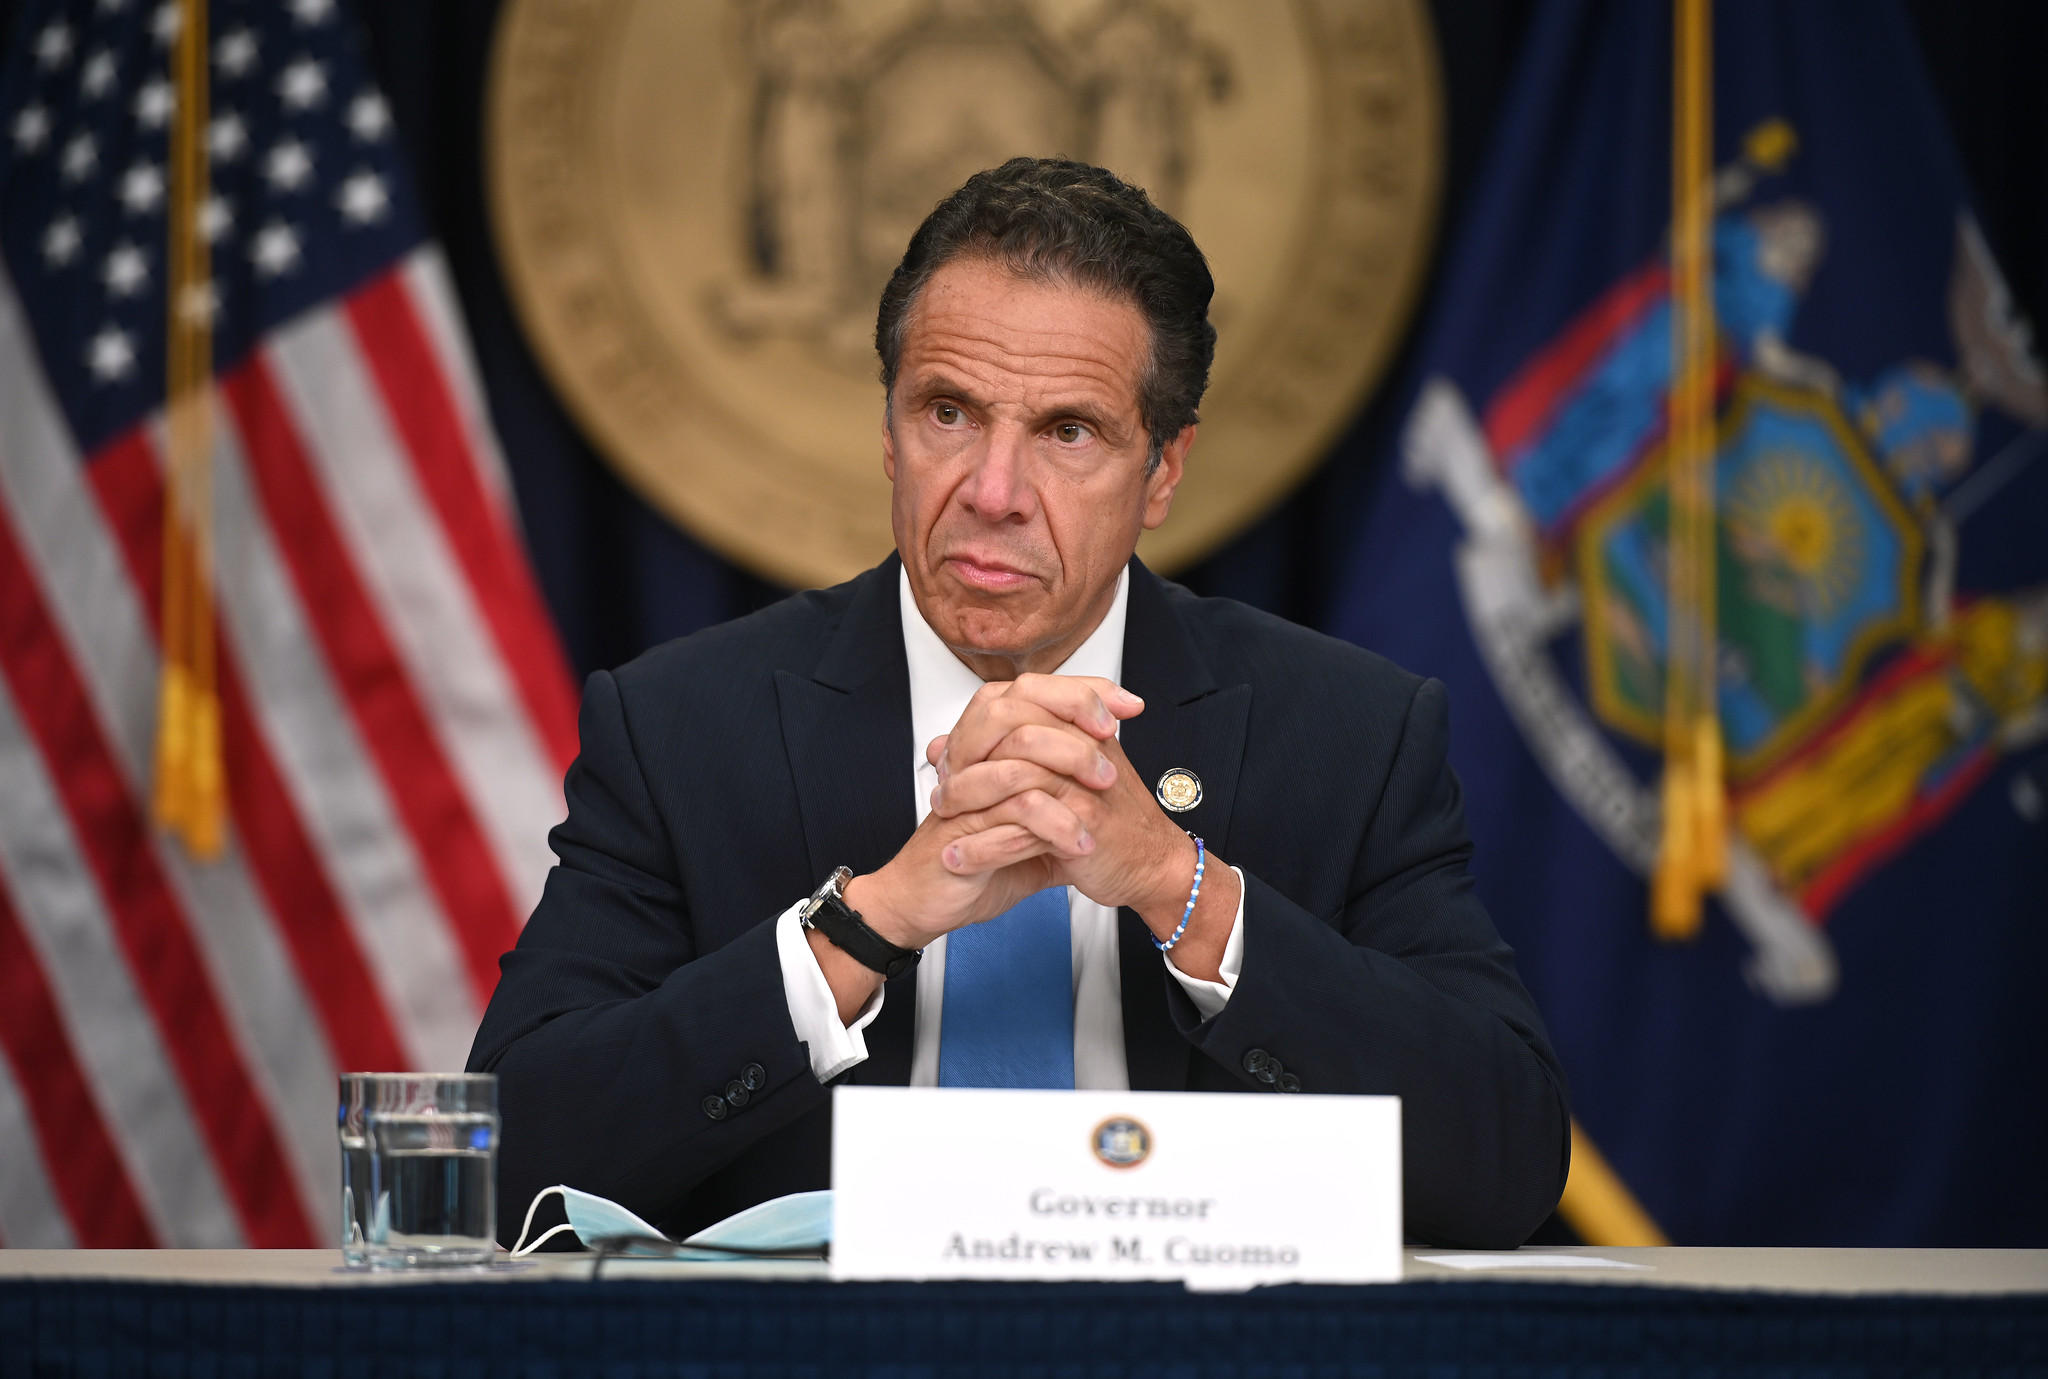 Andrew Cuomo: From A Calm Storm To A Hurricane